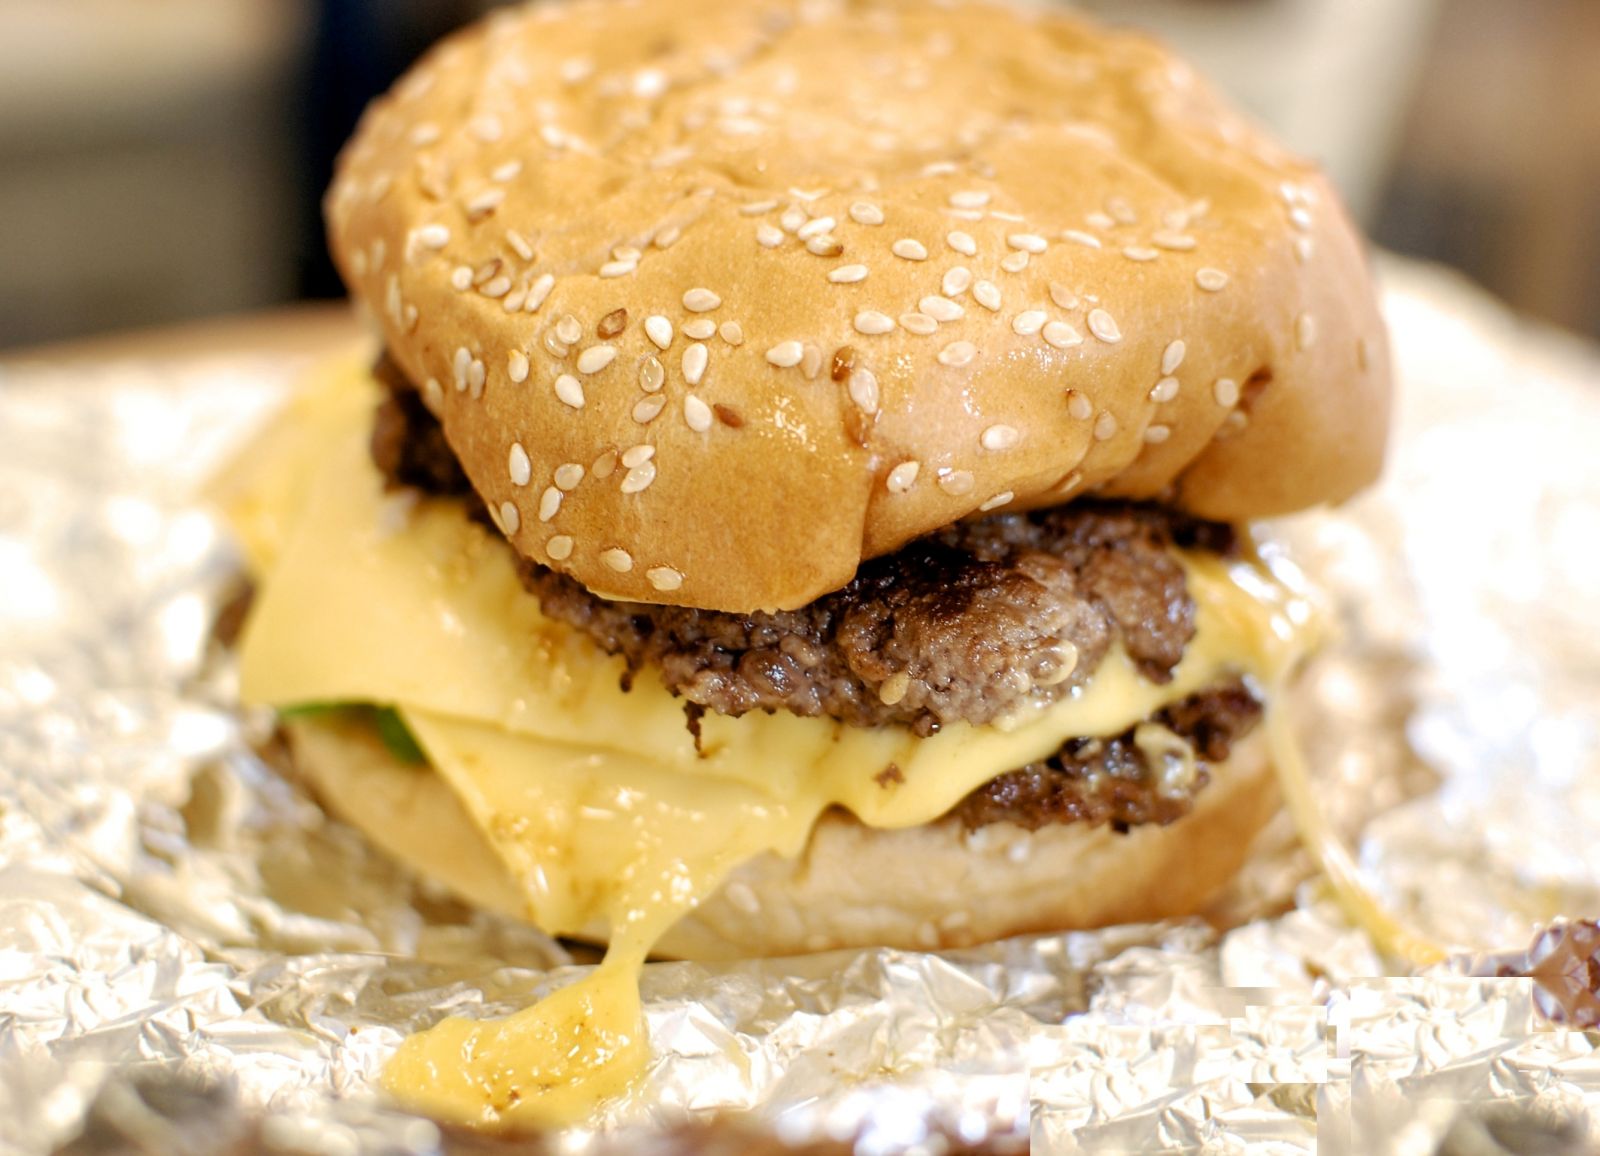 A ‘Five Guys’ burger with beef and cheese